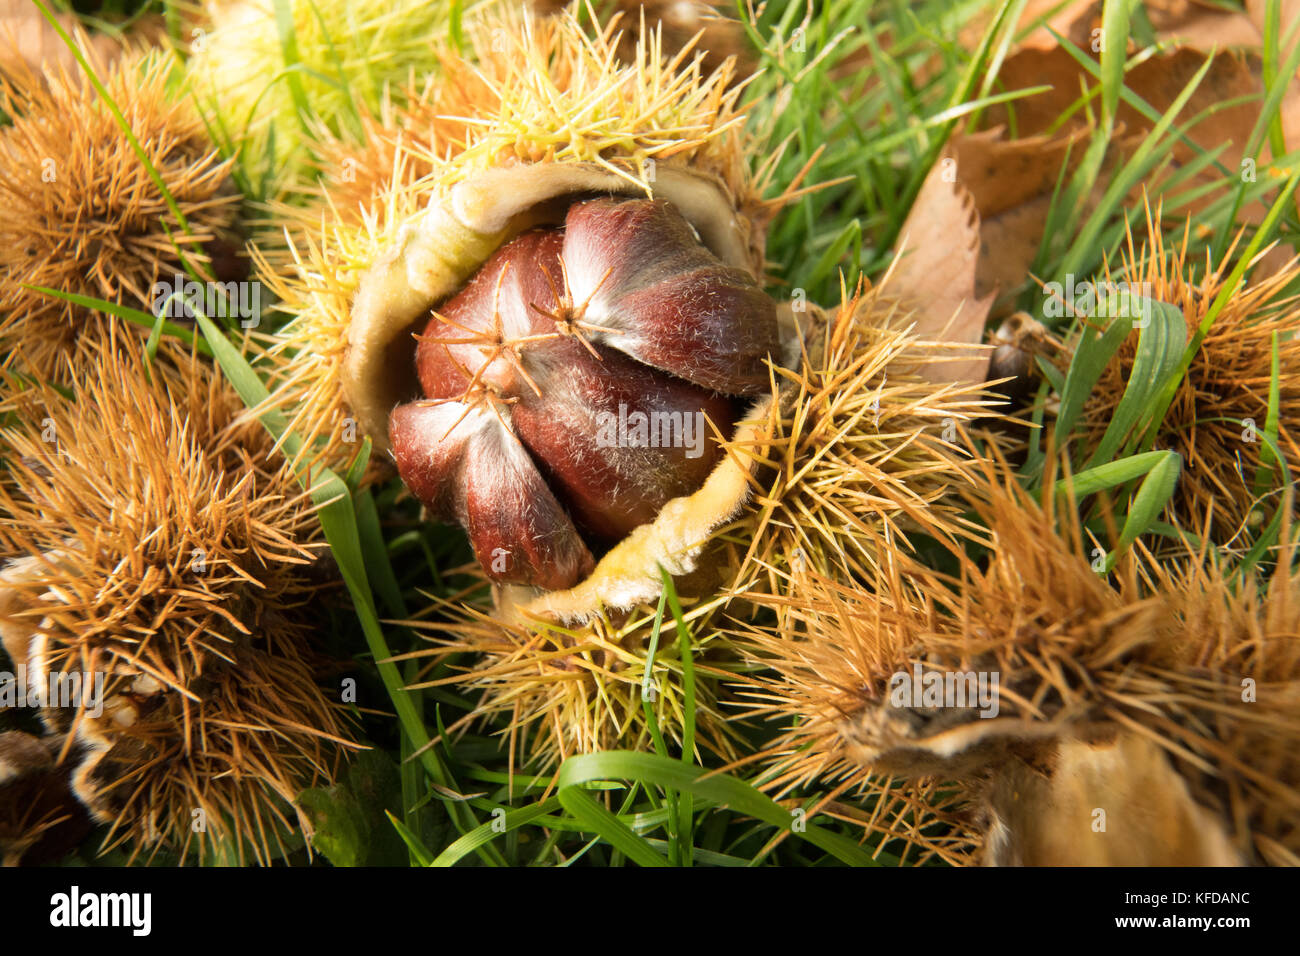 Sweet chestnut fruit lying on grass beneath tree - wild food that is traditionally foraged for in Autumn. Stock Photo